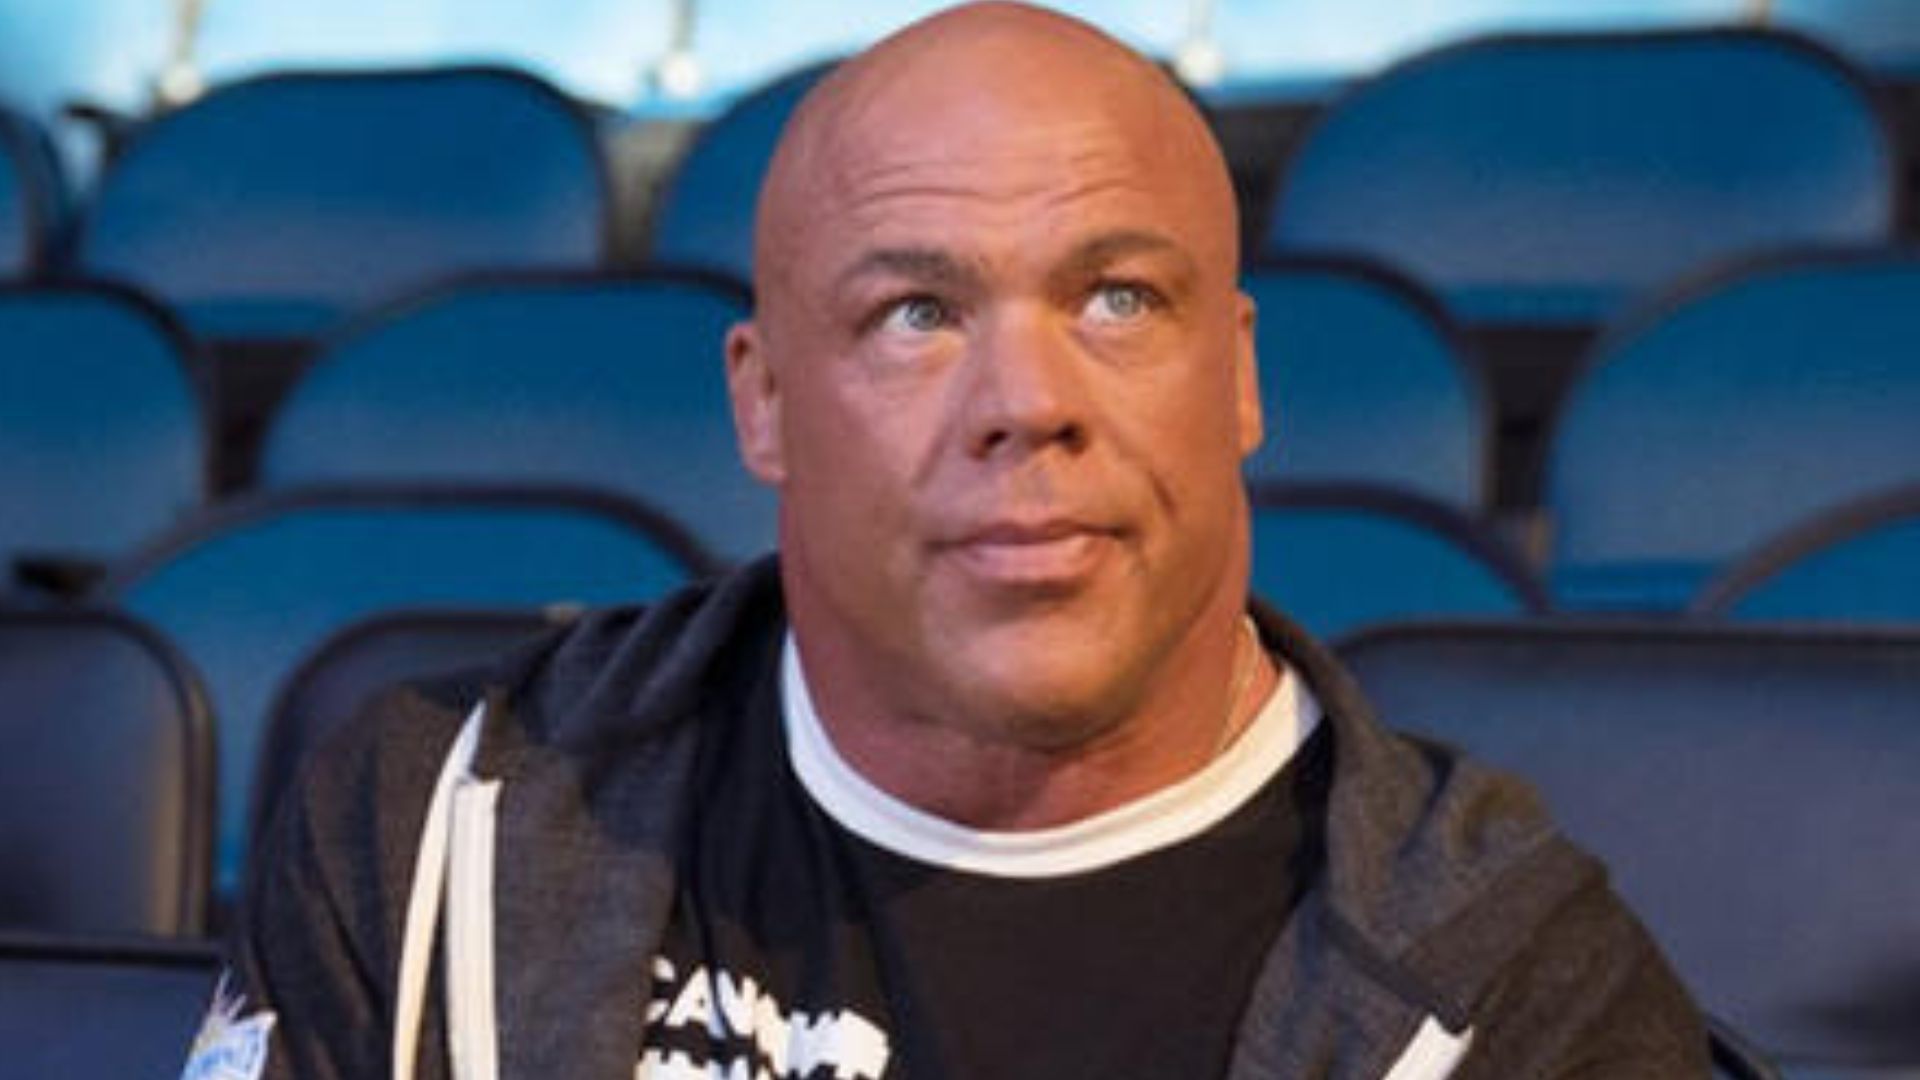 WWE Hall of Famer Kurt Angle is one of the greatest wrestlers of all time